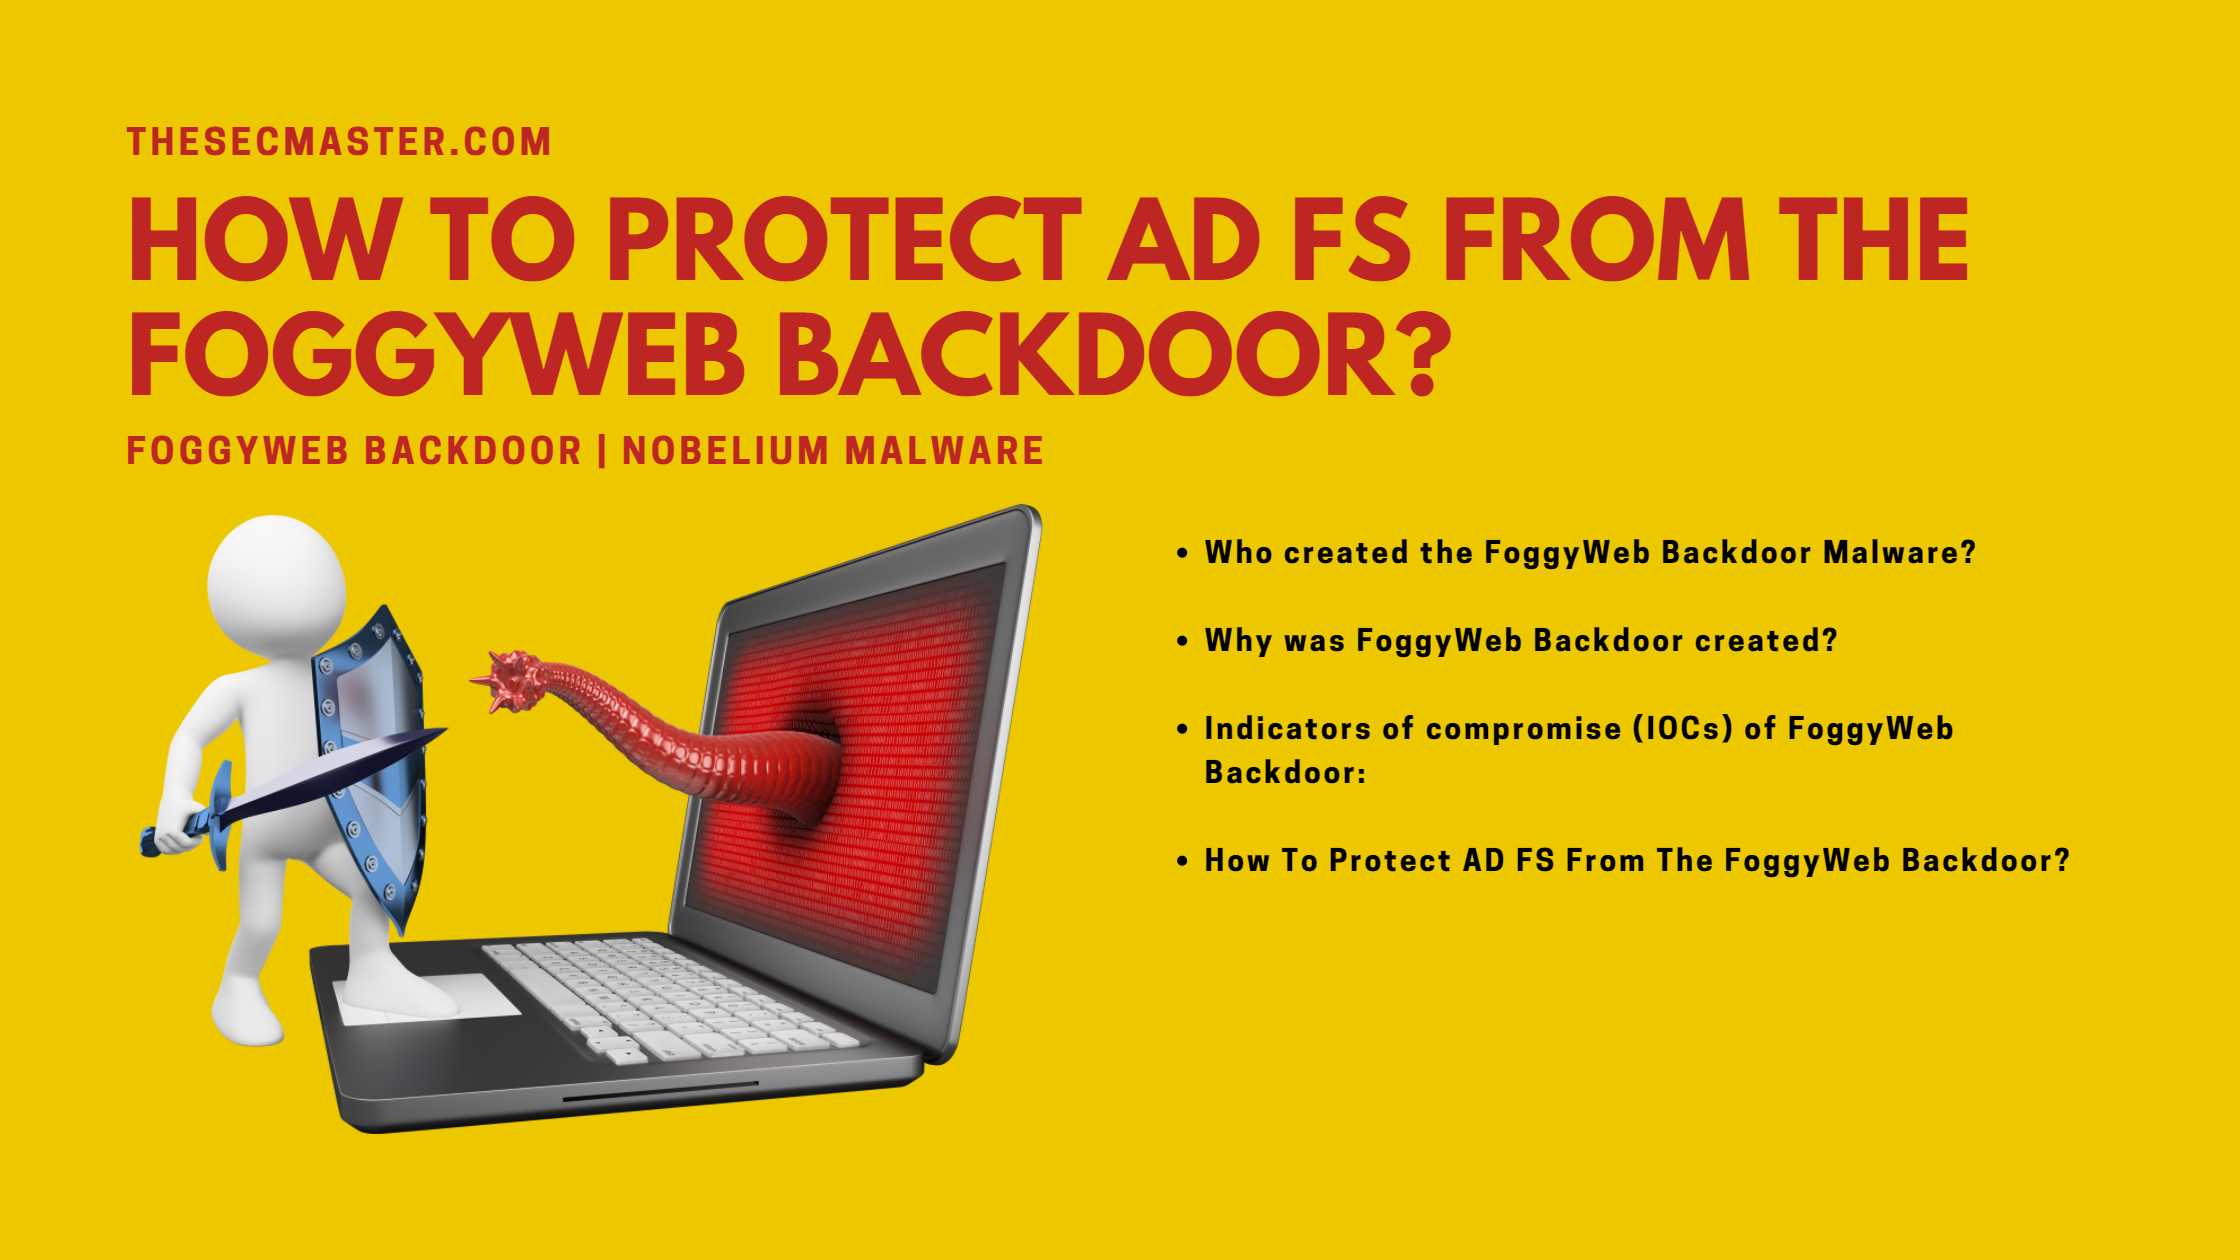 How To Protect Ad Fs From The Foggyweb Backdoor